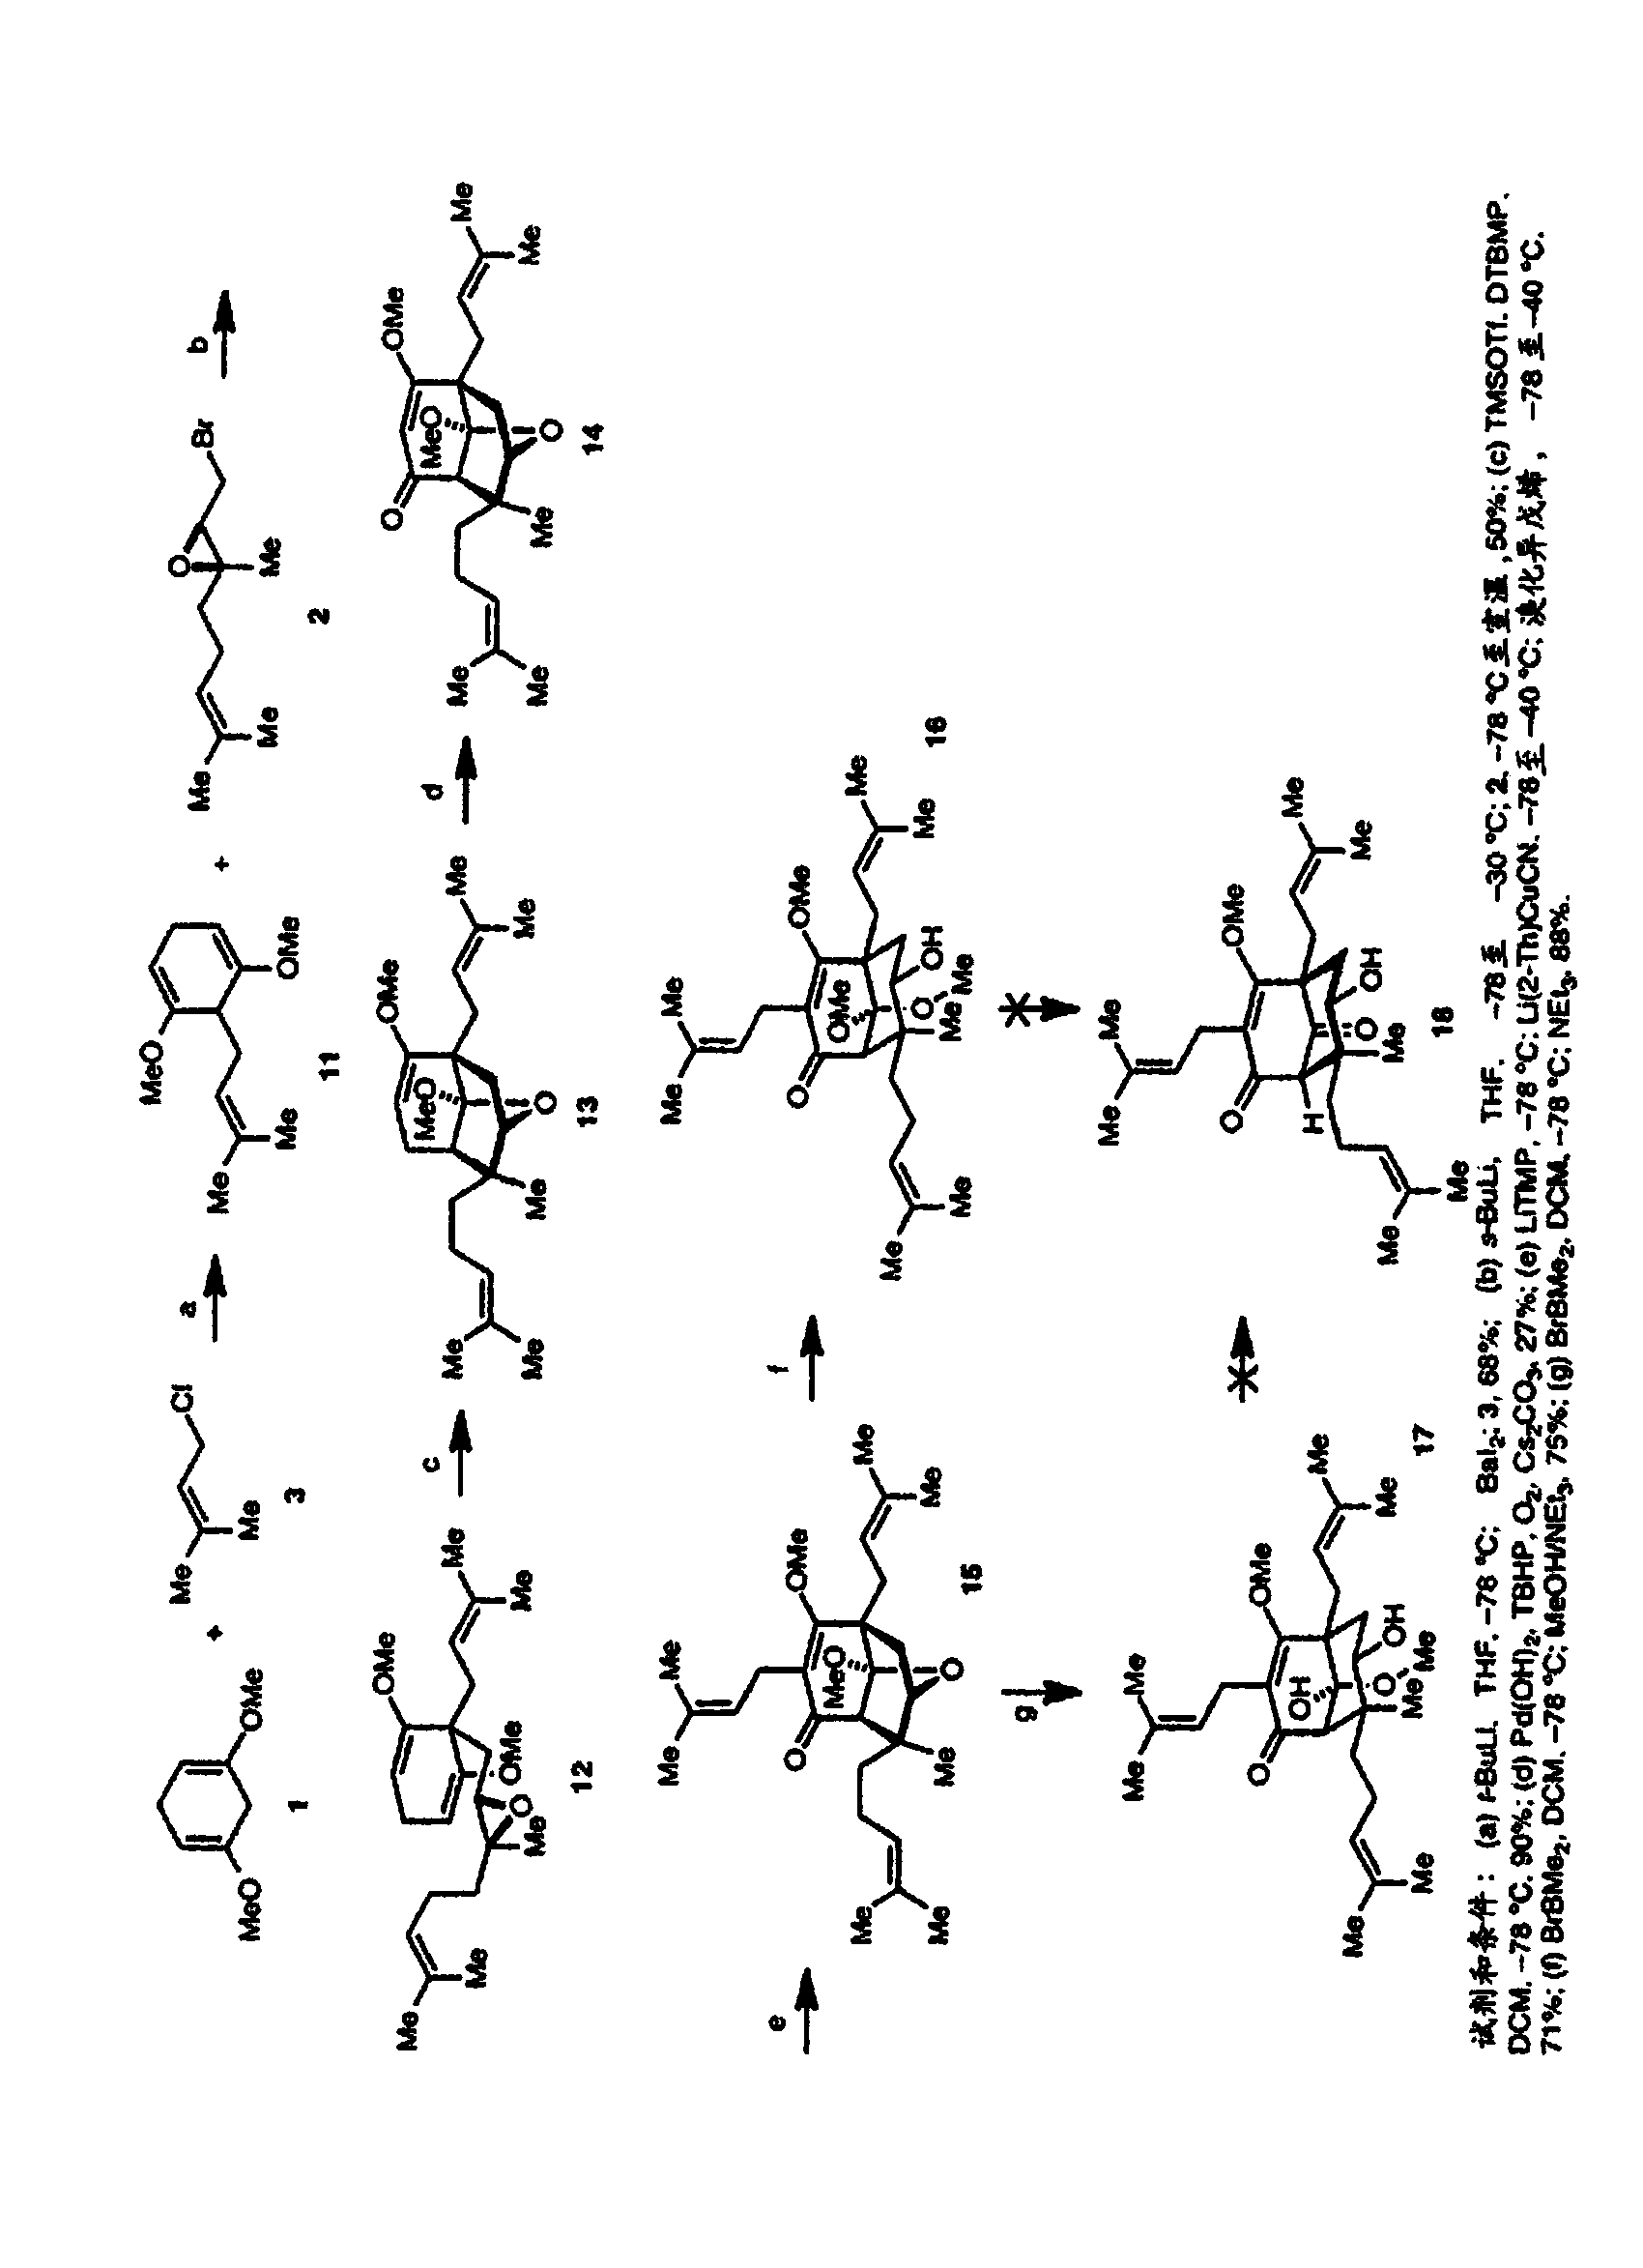 Hyperforin analogs, methods of synthesis, and uses thereof